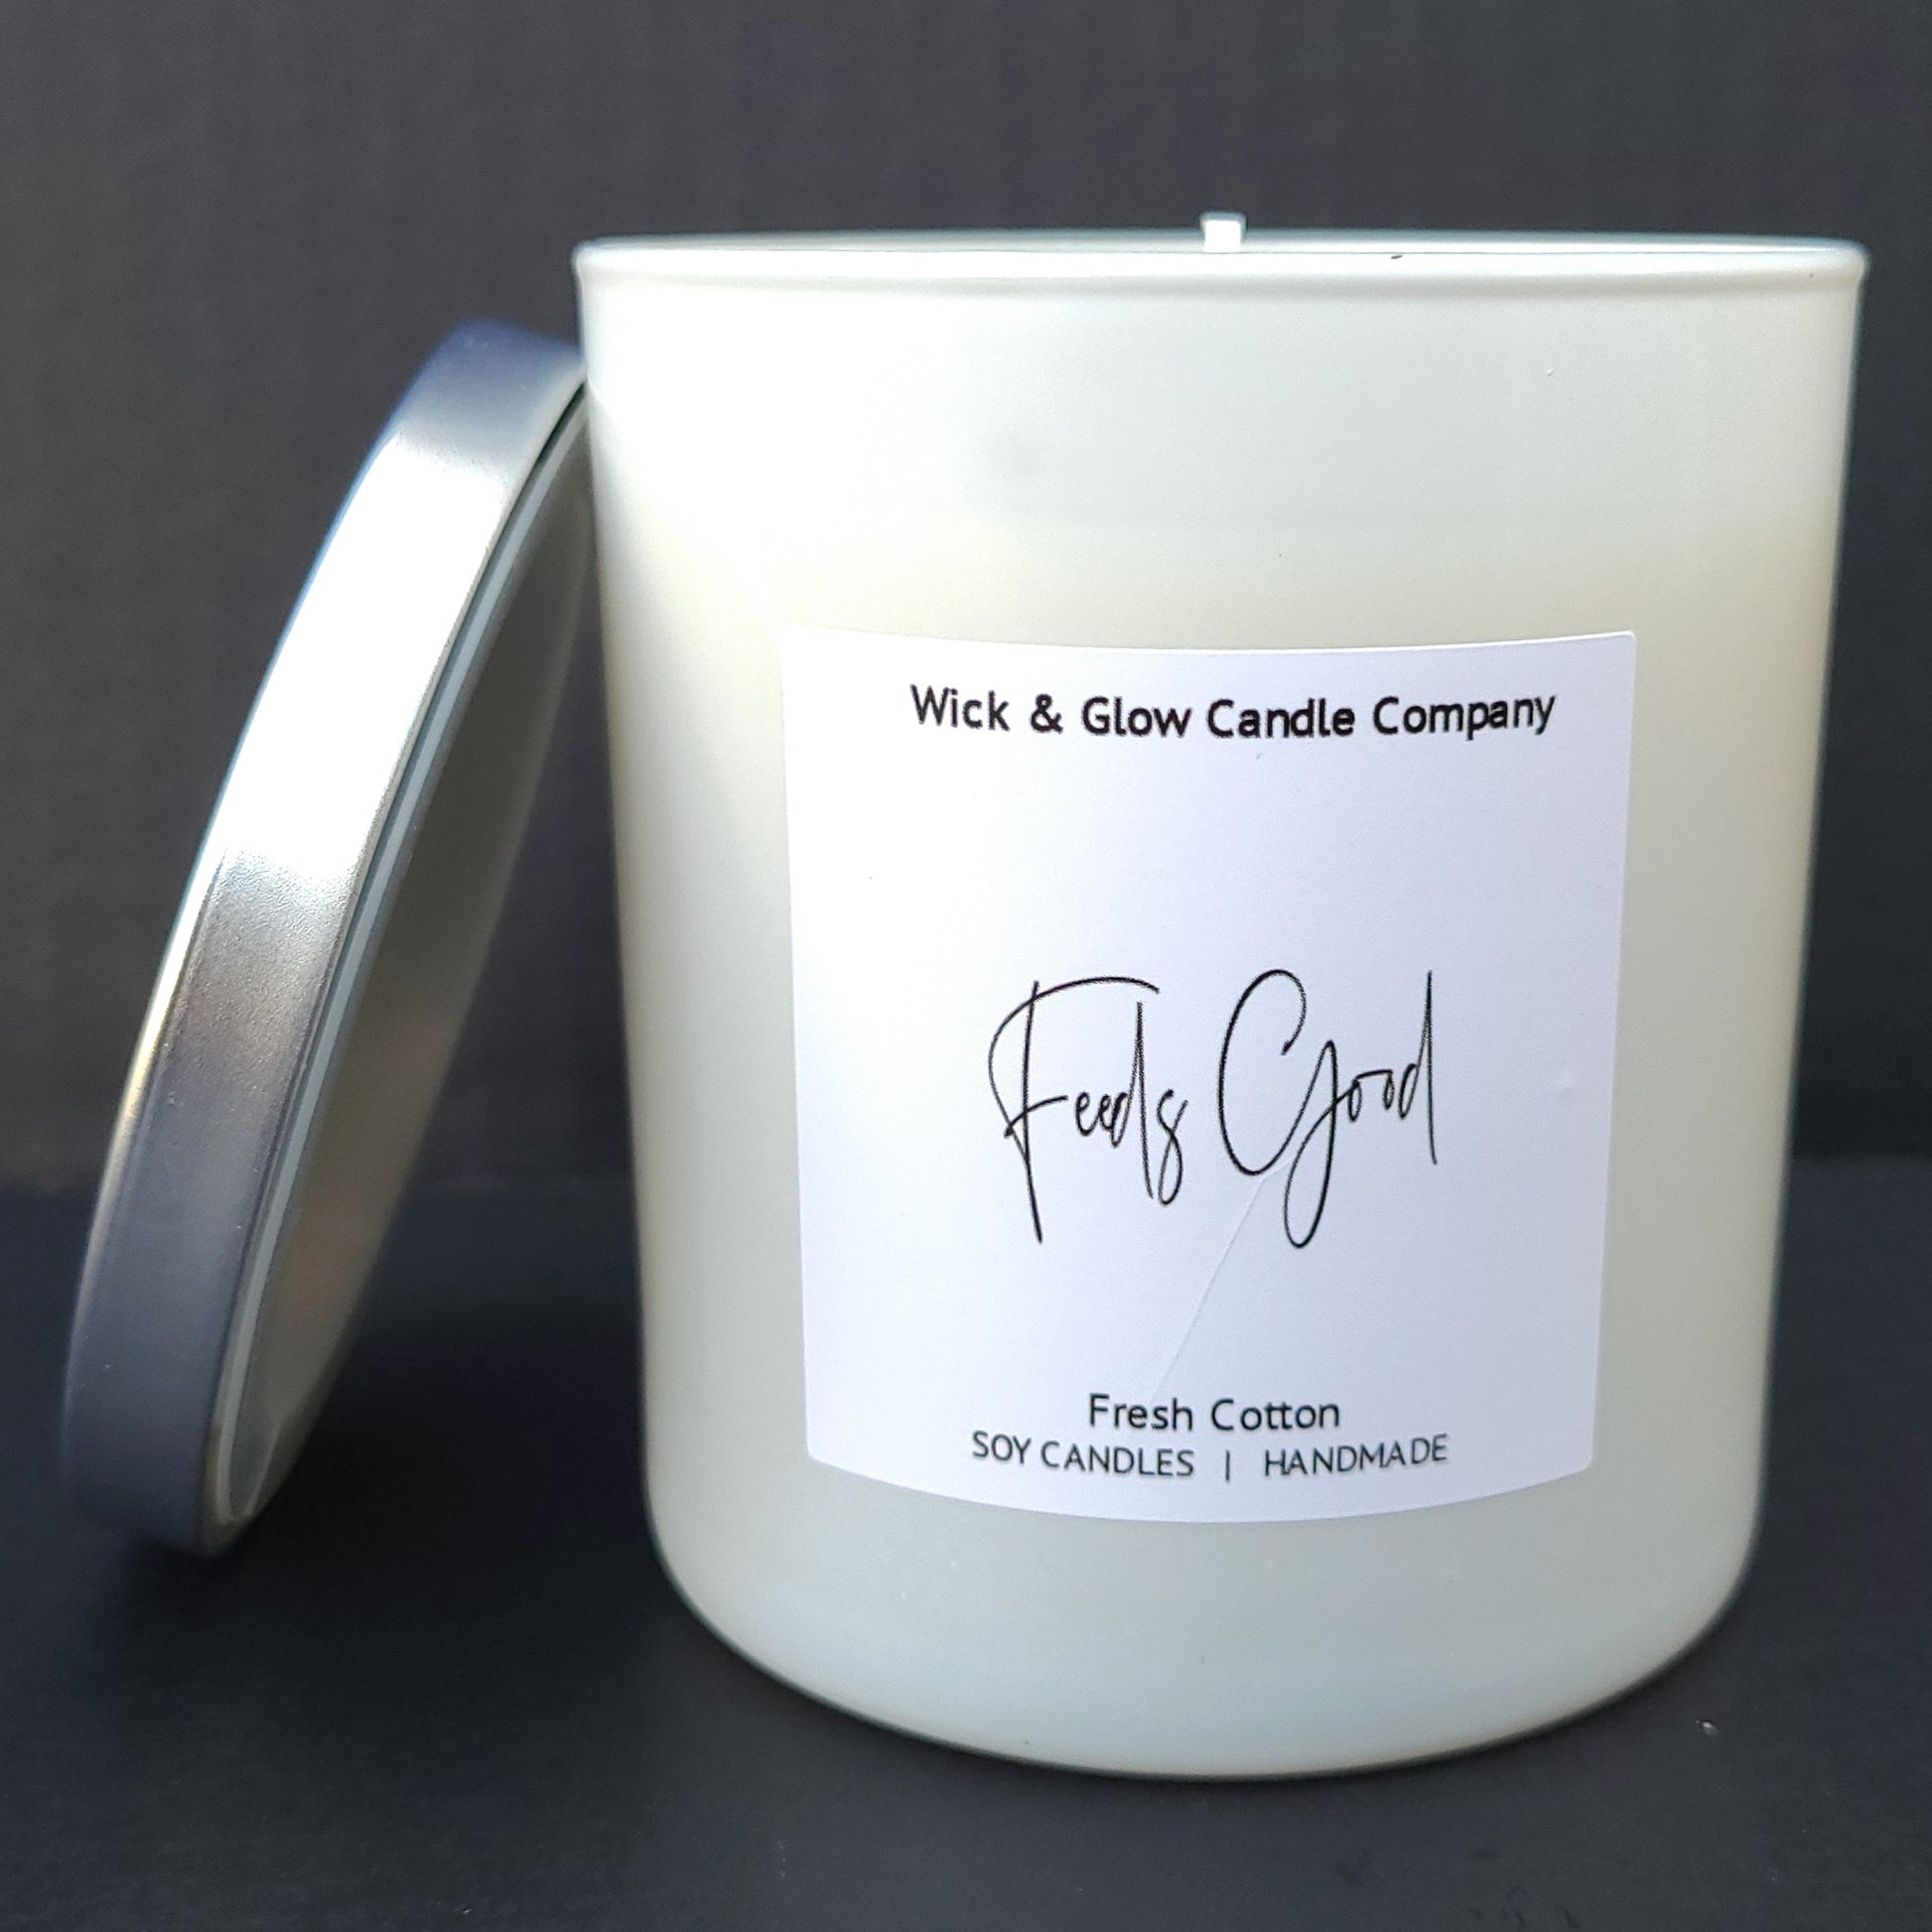 Feels Good- Fresh Linen Luxury Scented Candle - The Wick and Glow Candle Company